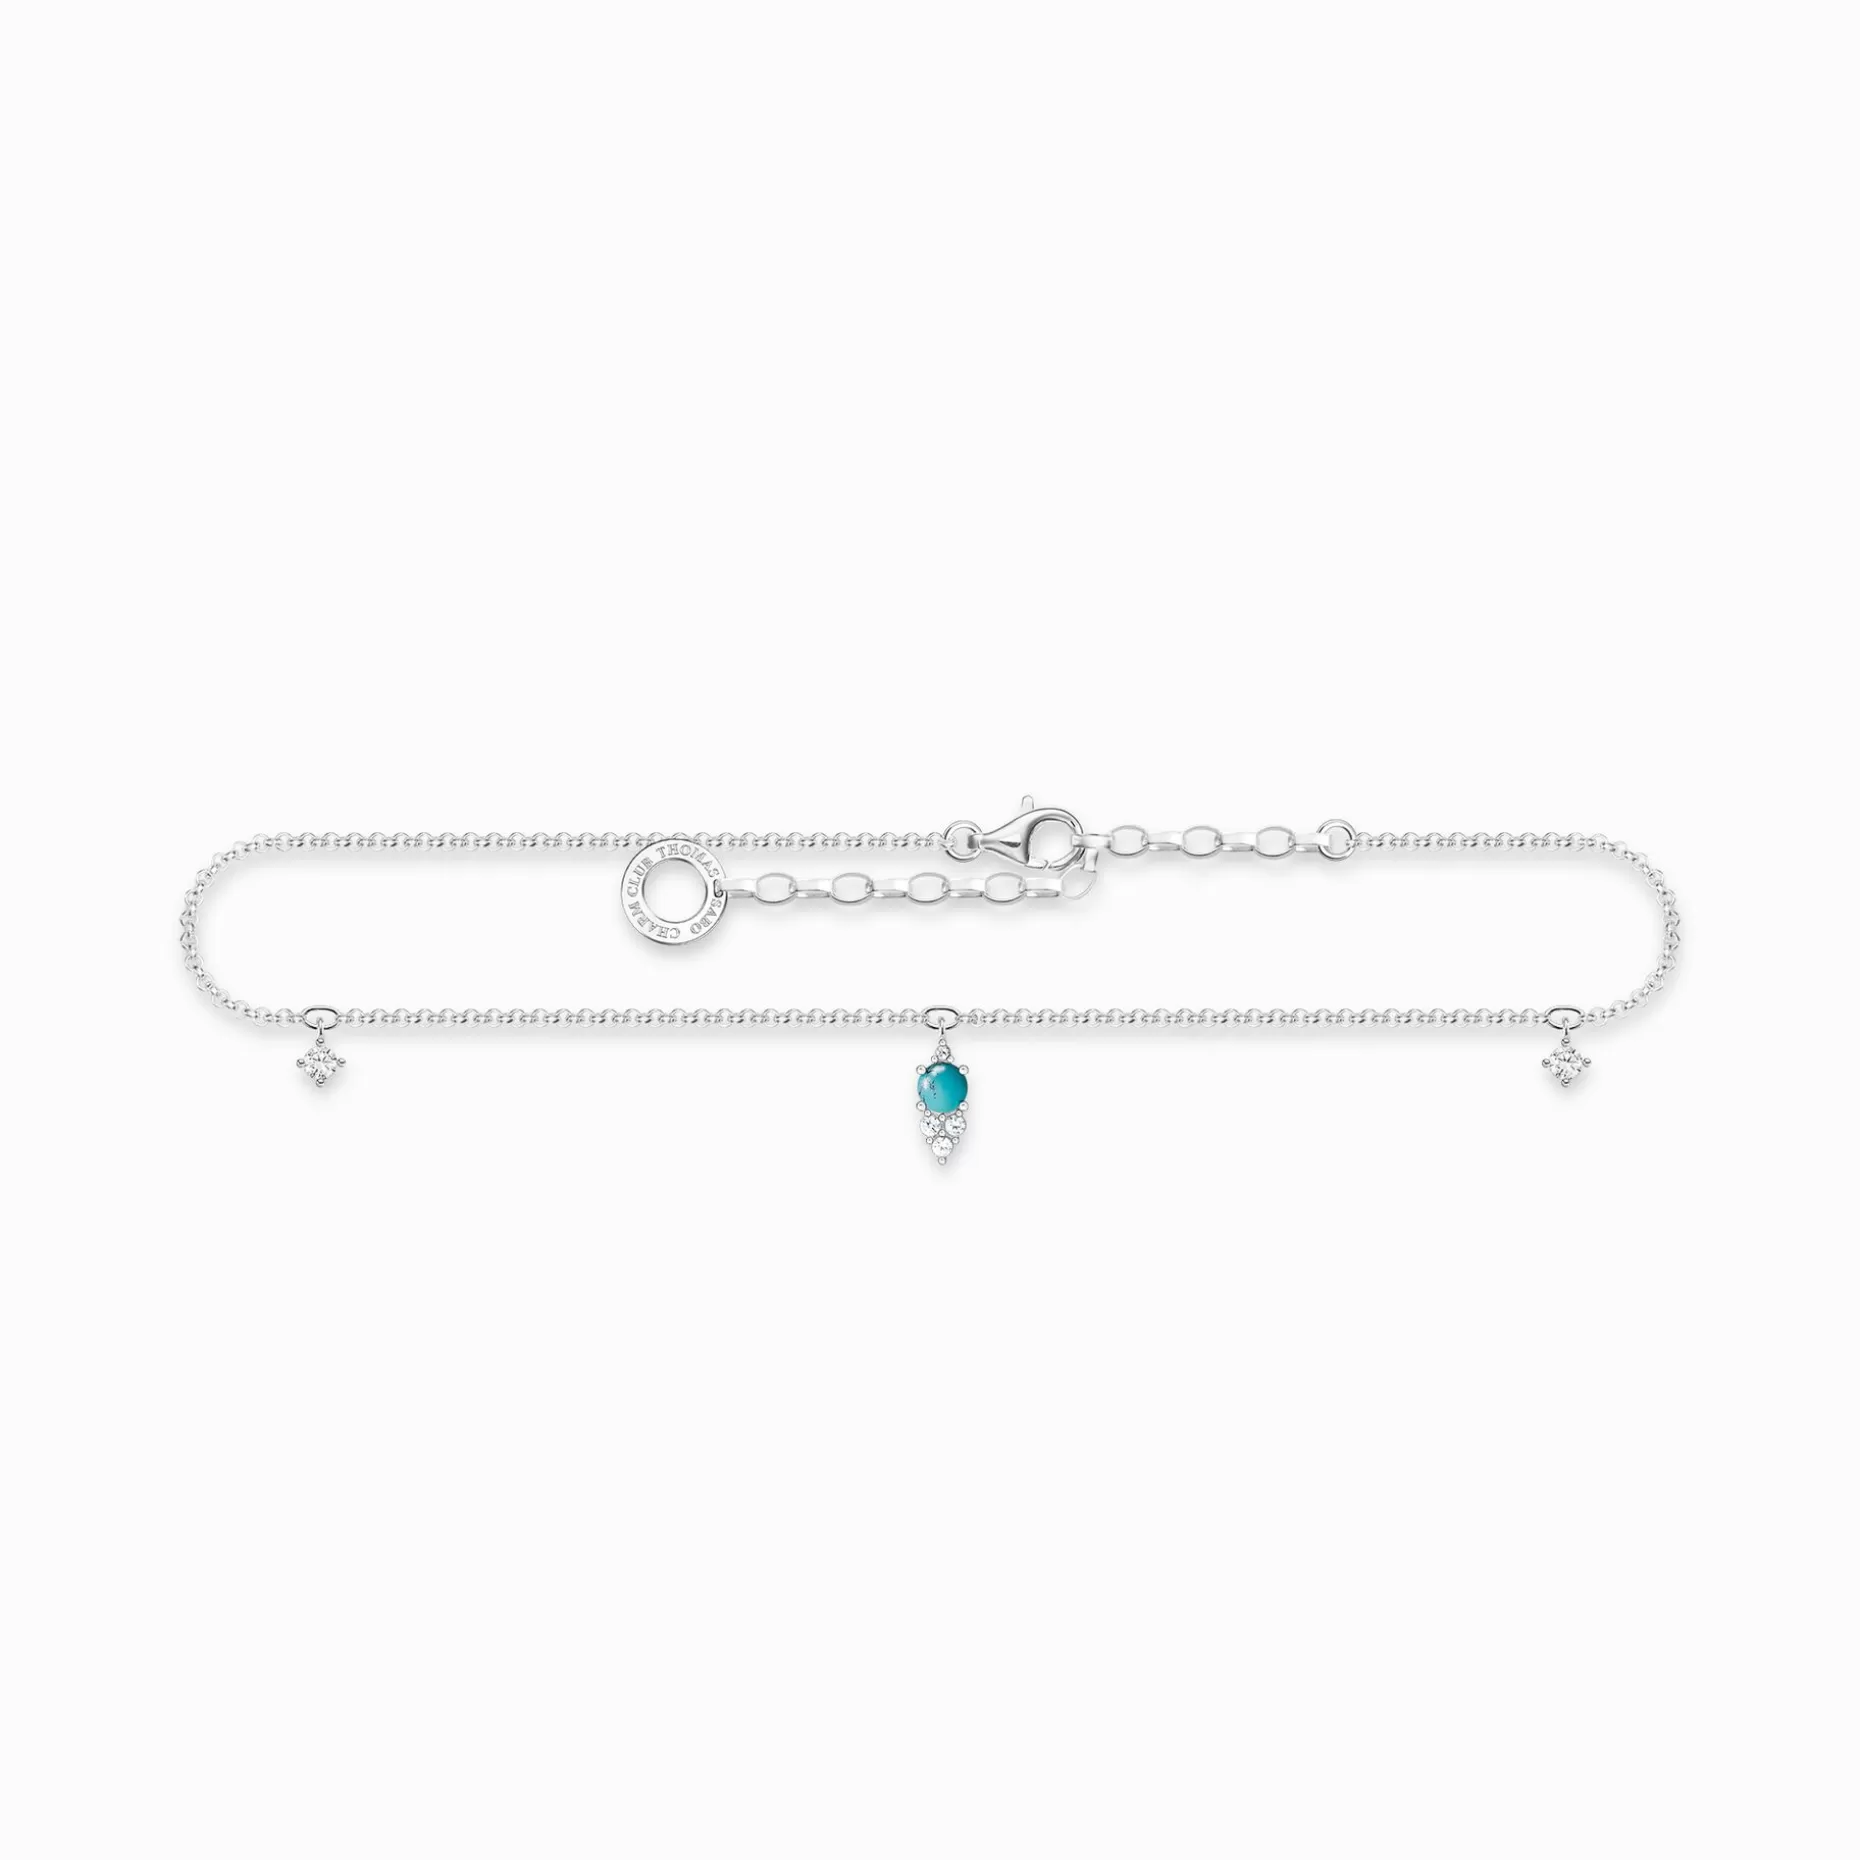 THOMAS SABO Anklet turquoise stone silver silver-coloured, turquoise, white Clearance